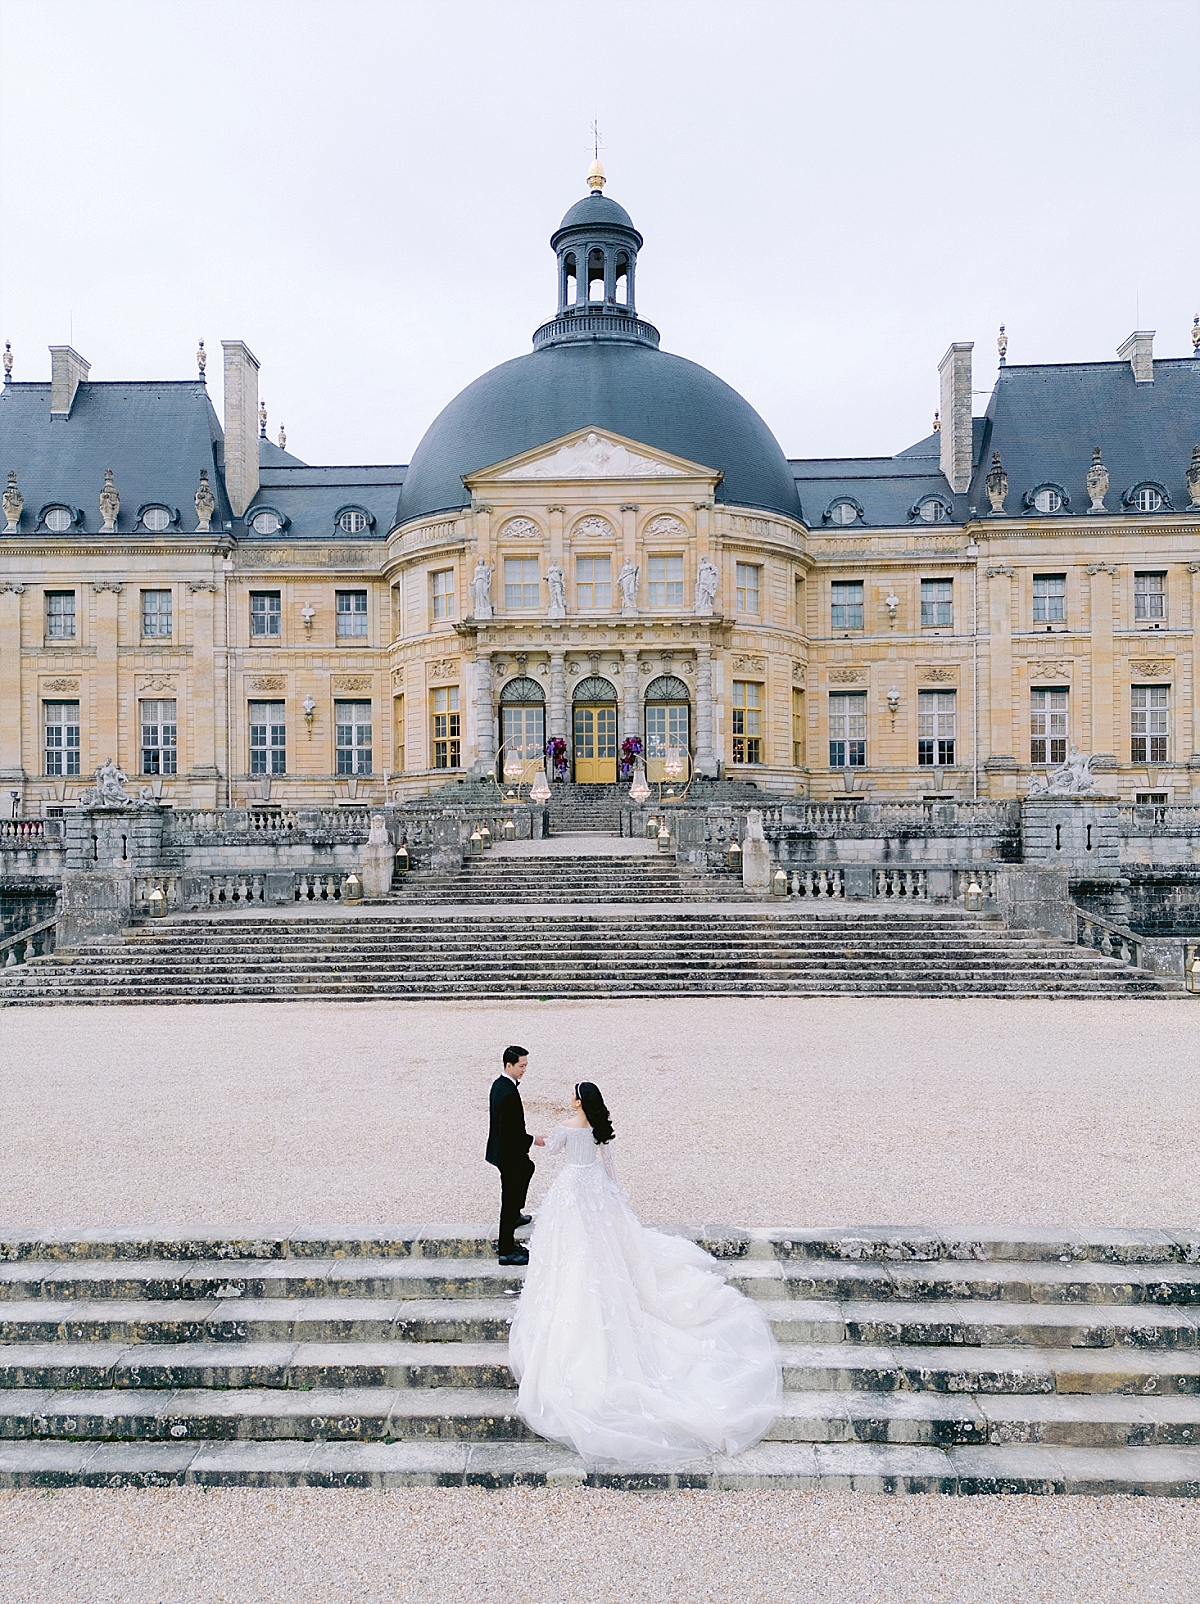 Bride and Groom at their Luxury Wedding at Chateau de Vaux le Vicomte